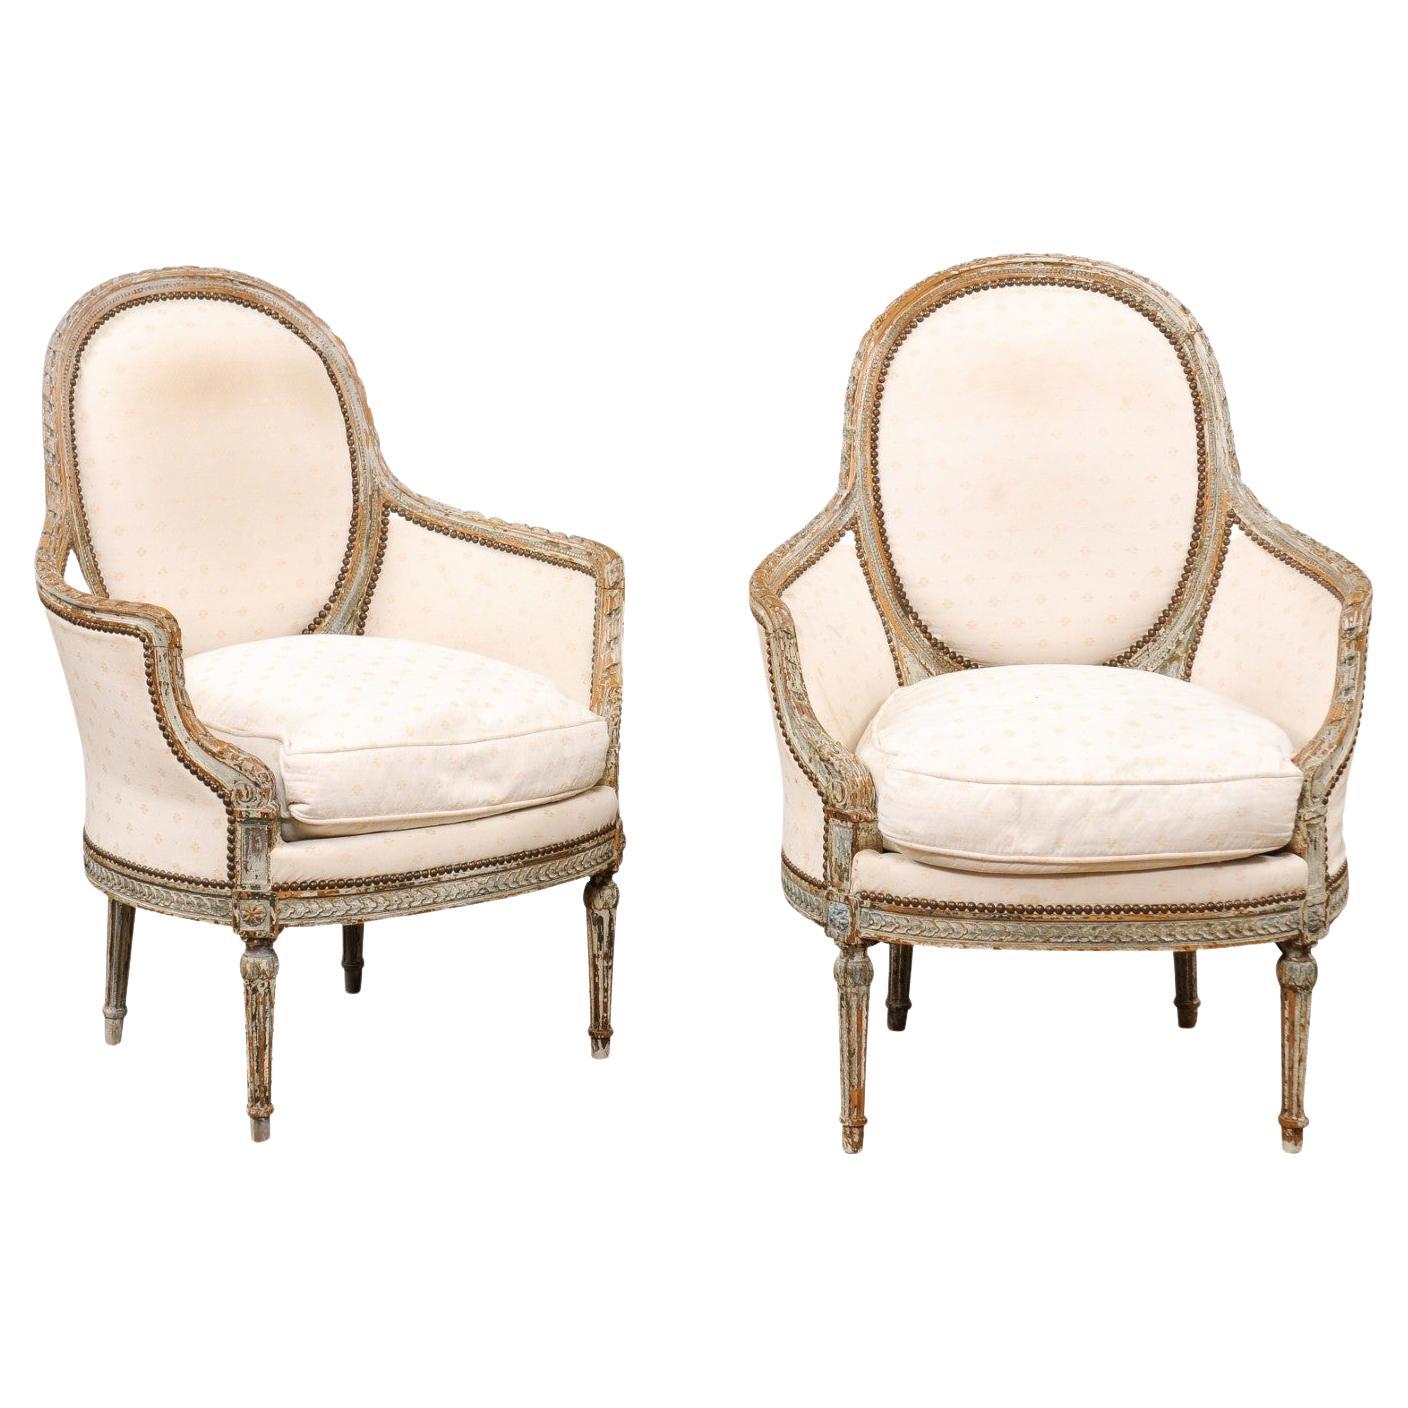 Pair of French 1850s Louis XVI Style Painted Bergère Chairs with Carved Décor